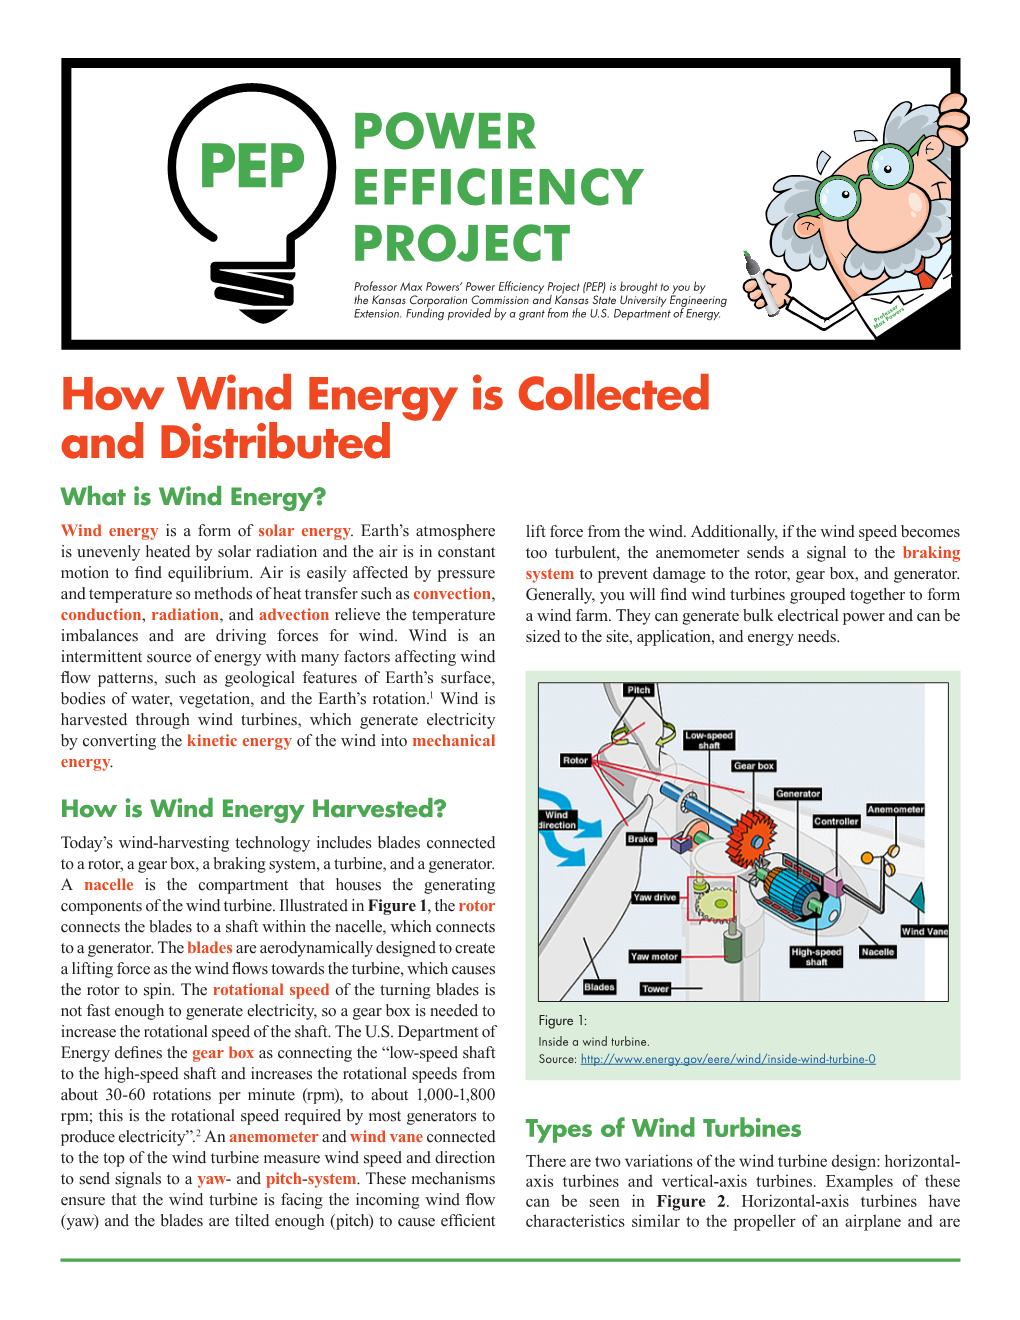 Wind Energy Is Collected and Distributed What Is Wind Energy? Wind Energy Is a Form of Solar Energy